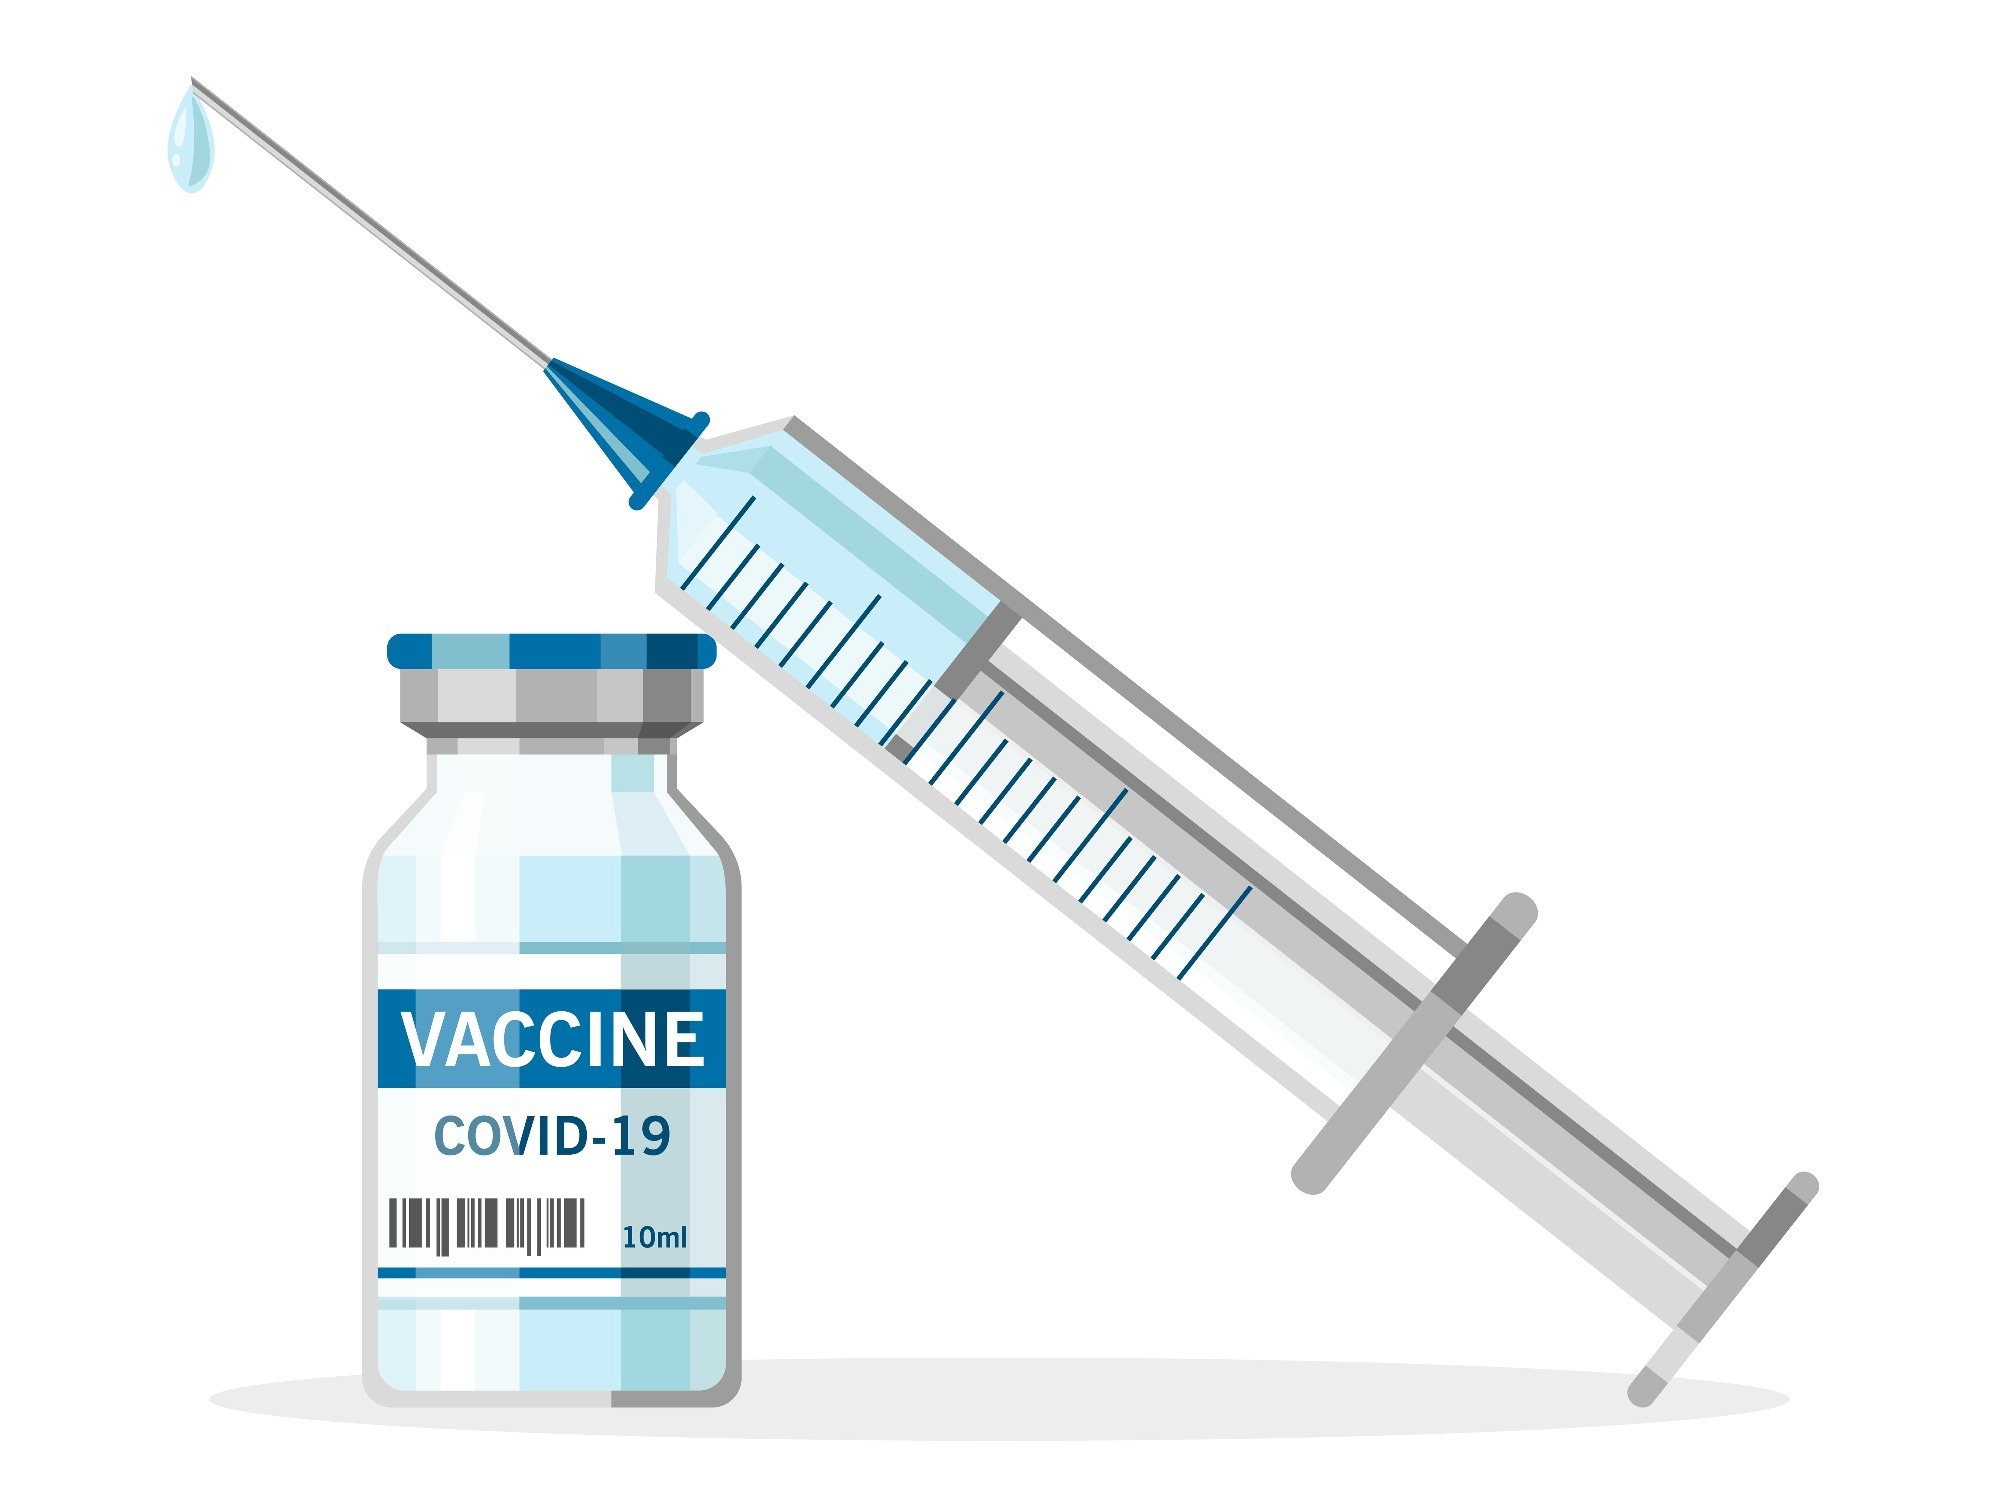 Study: Beta variant COVID-19 protein booster vaccines elicit durable cross-neutralization against SARS-CoV-2 variants of concern in non-human primates. Image Credit: aelina_design/Shutterstock